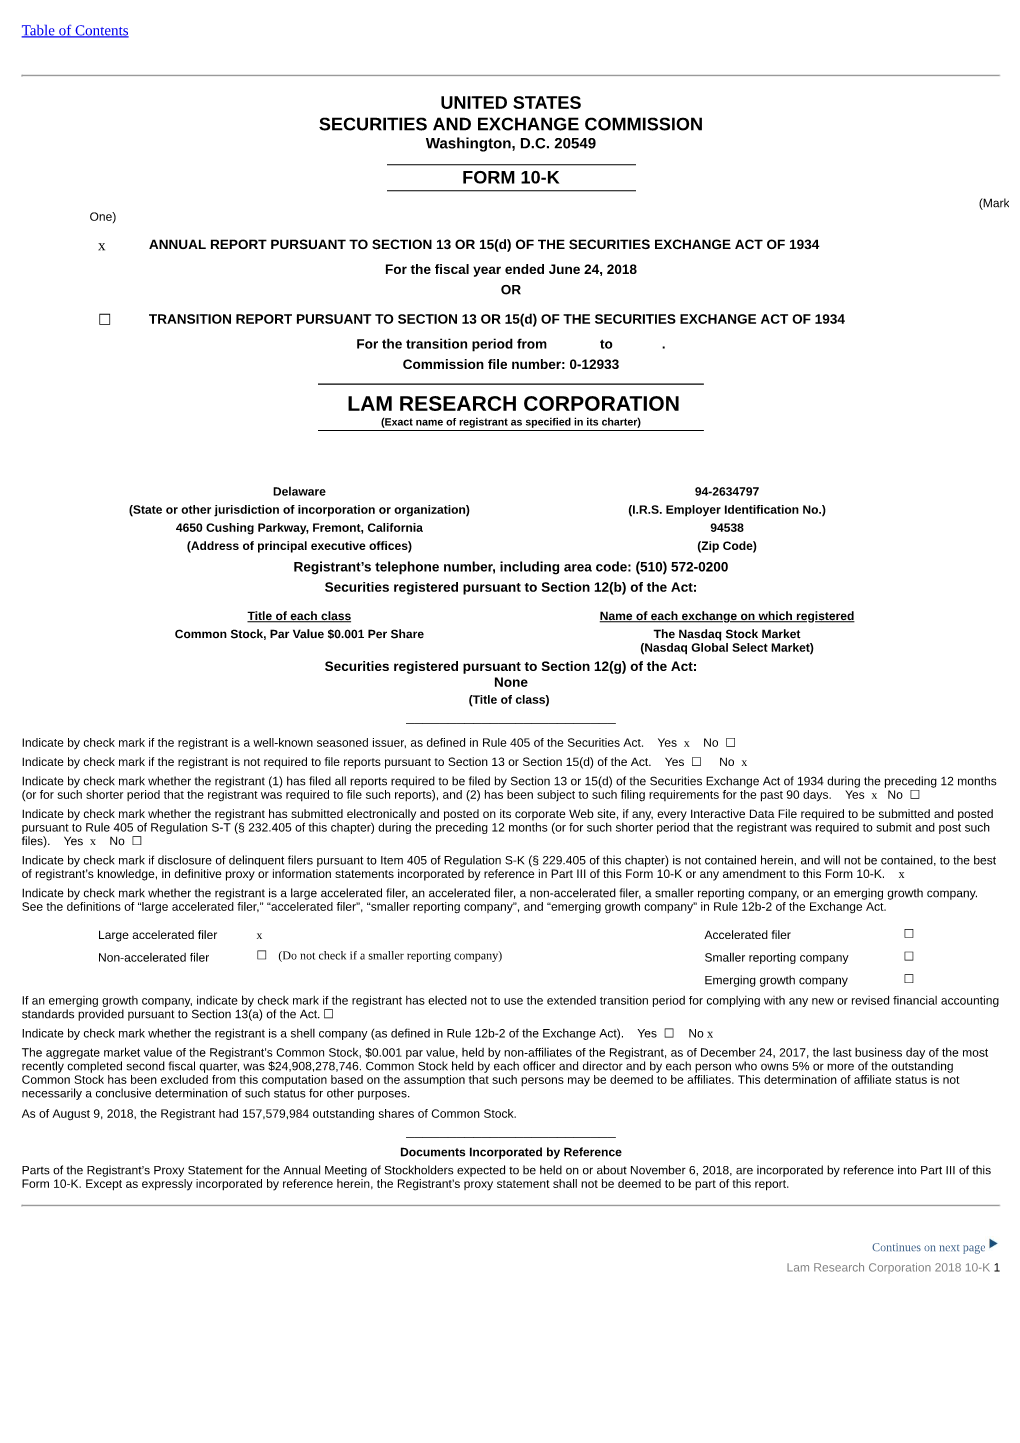 LAM RESEARCH CORPORATION (Exact Name of Registrant As Specified in Its Charter)